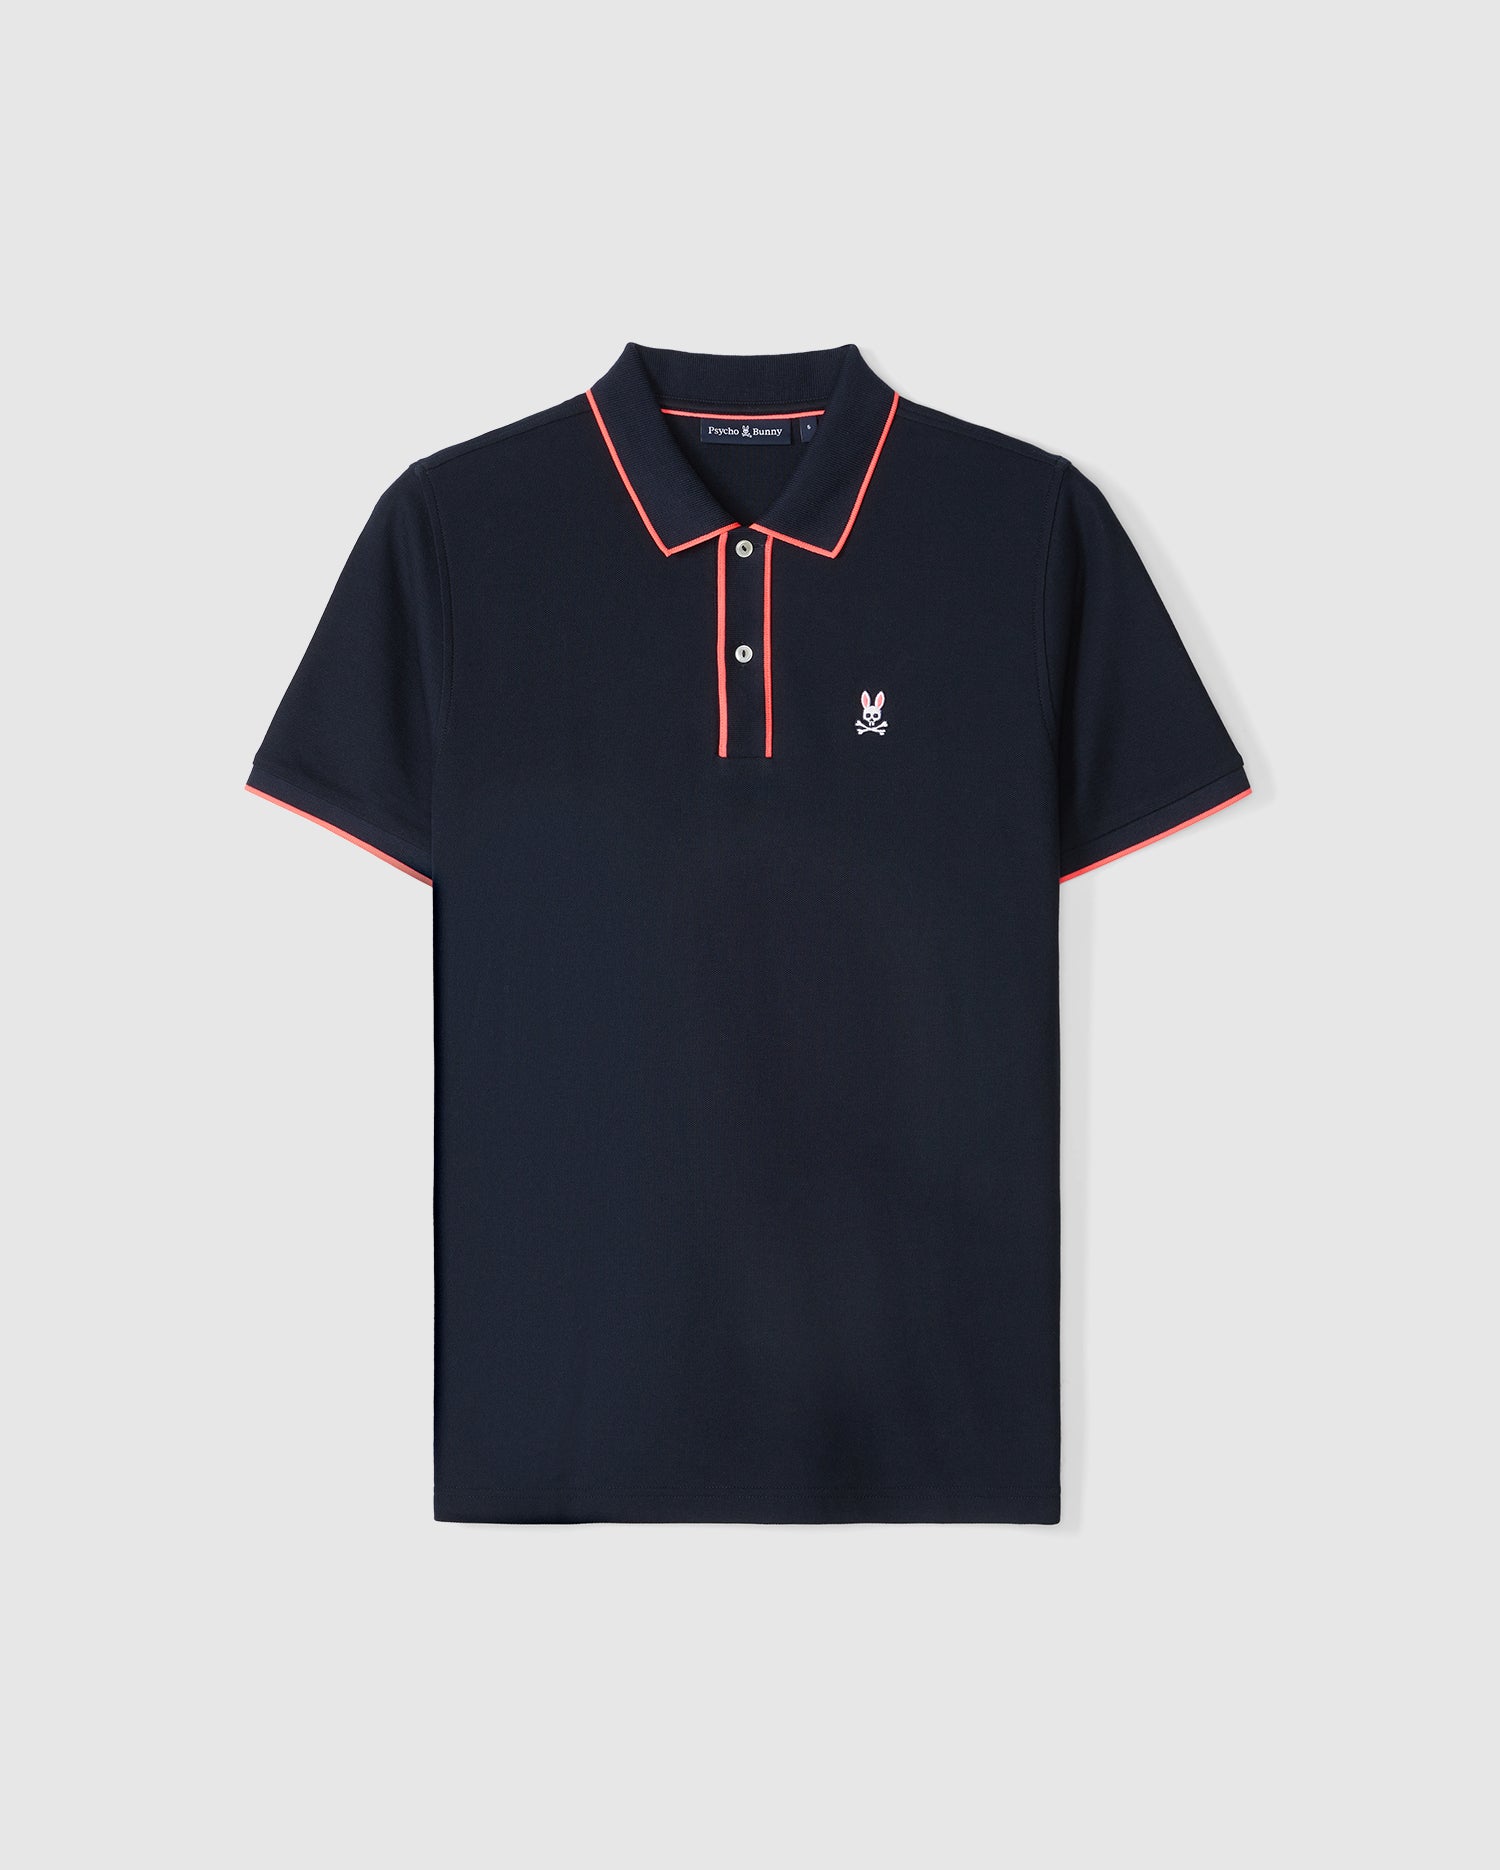 A navy blue Pima cotton polo shirt with red and white trim on the collar and sleeves. The shirt features two genuine mother of pearl buttons and an embroidered Bunny logo on the left chest. Introducing the Psycho Bunny MENS DALLAS PIQUE POLO SHIRT - B6K602C200.